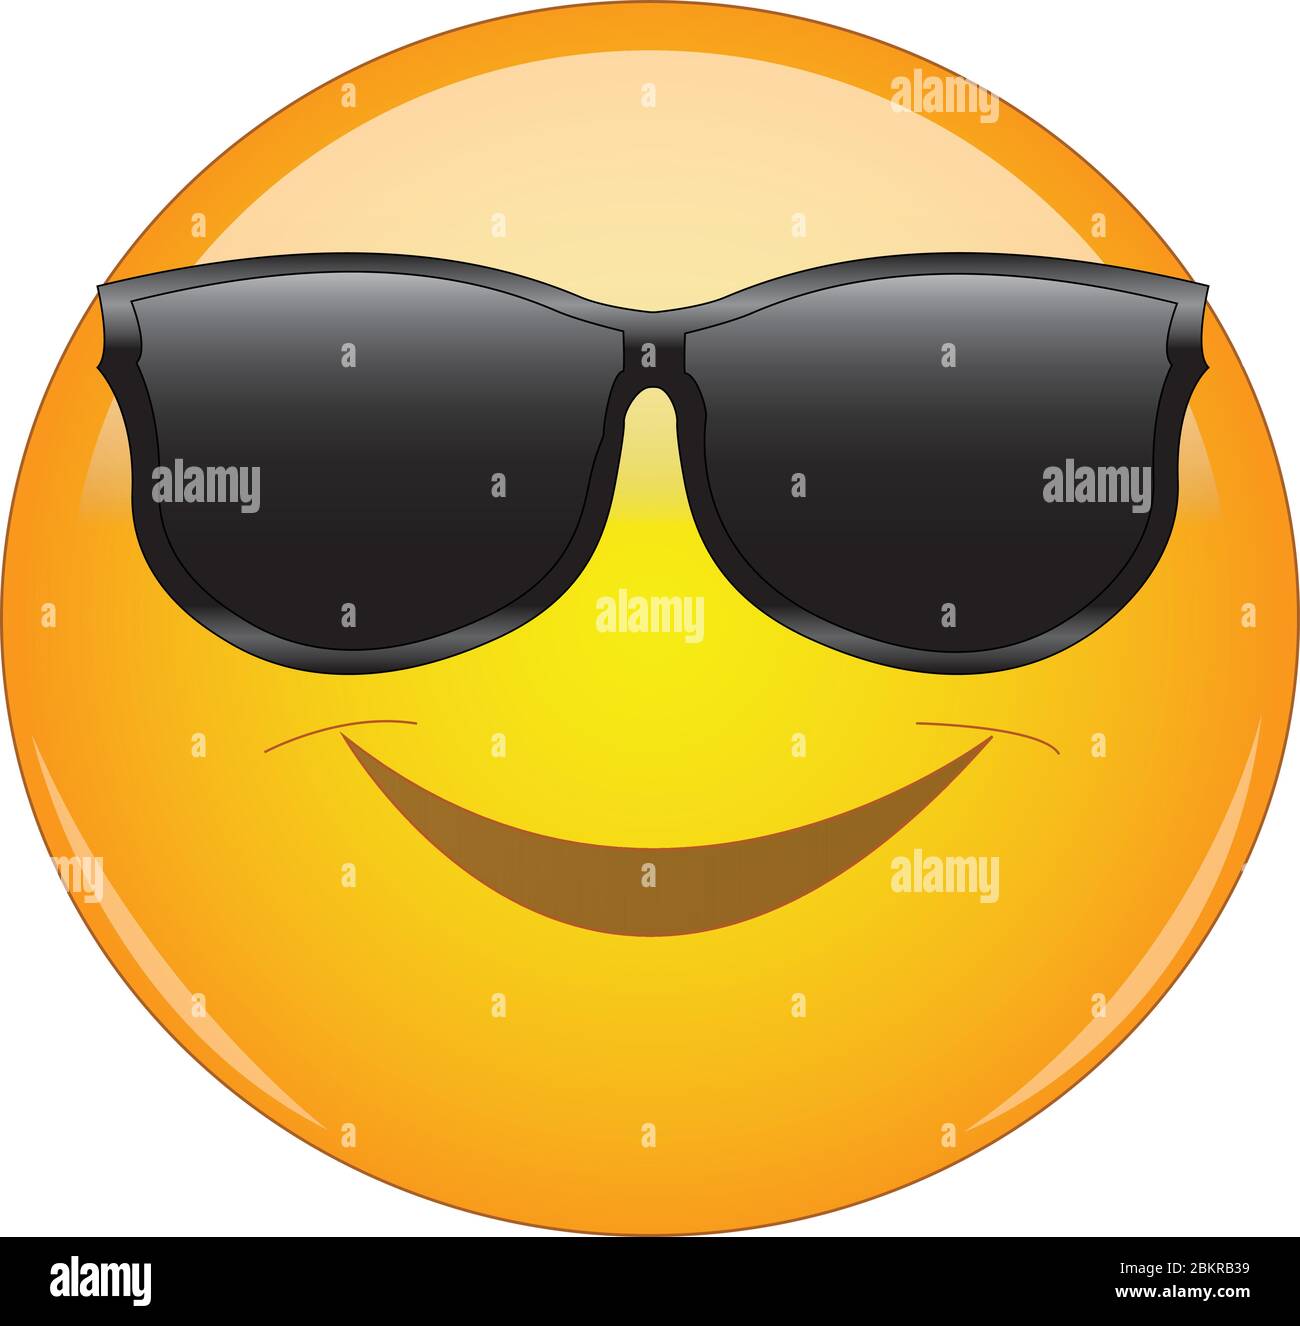 Cool emoji in shades. Yellow smiling face emoticon wearing sunglasses. Expression of being cool, happy, smiling. Stock Vector